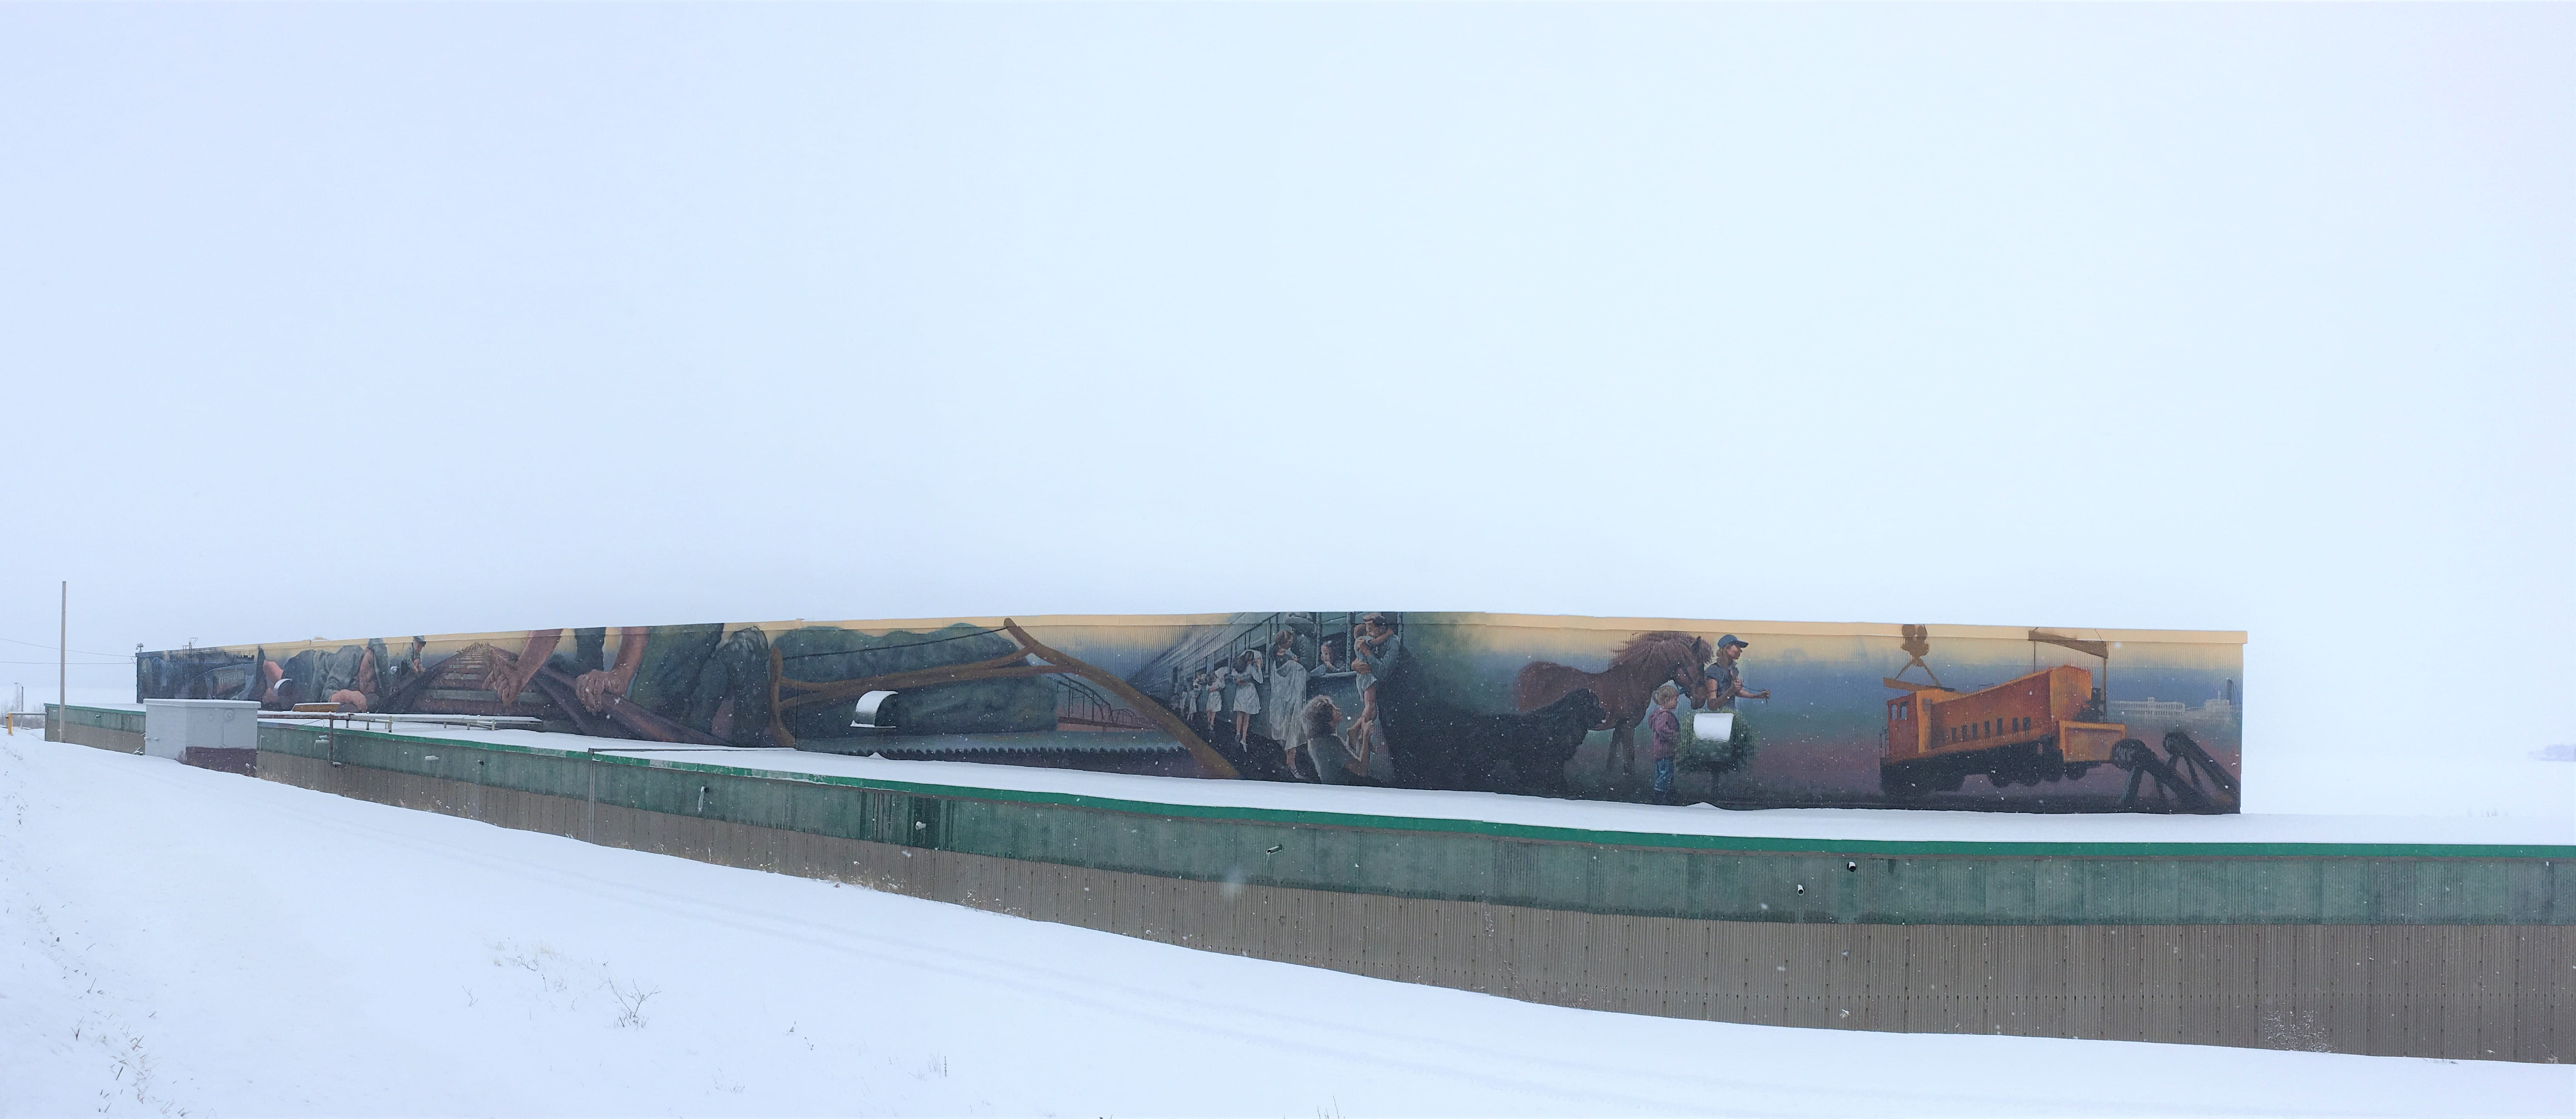 Come Home mural, Botwood